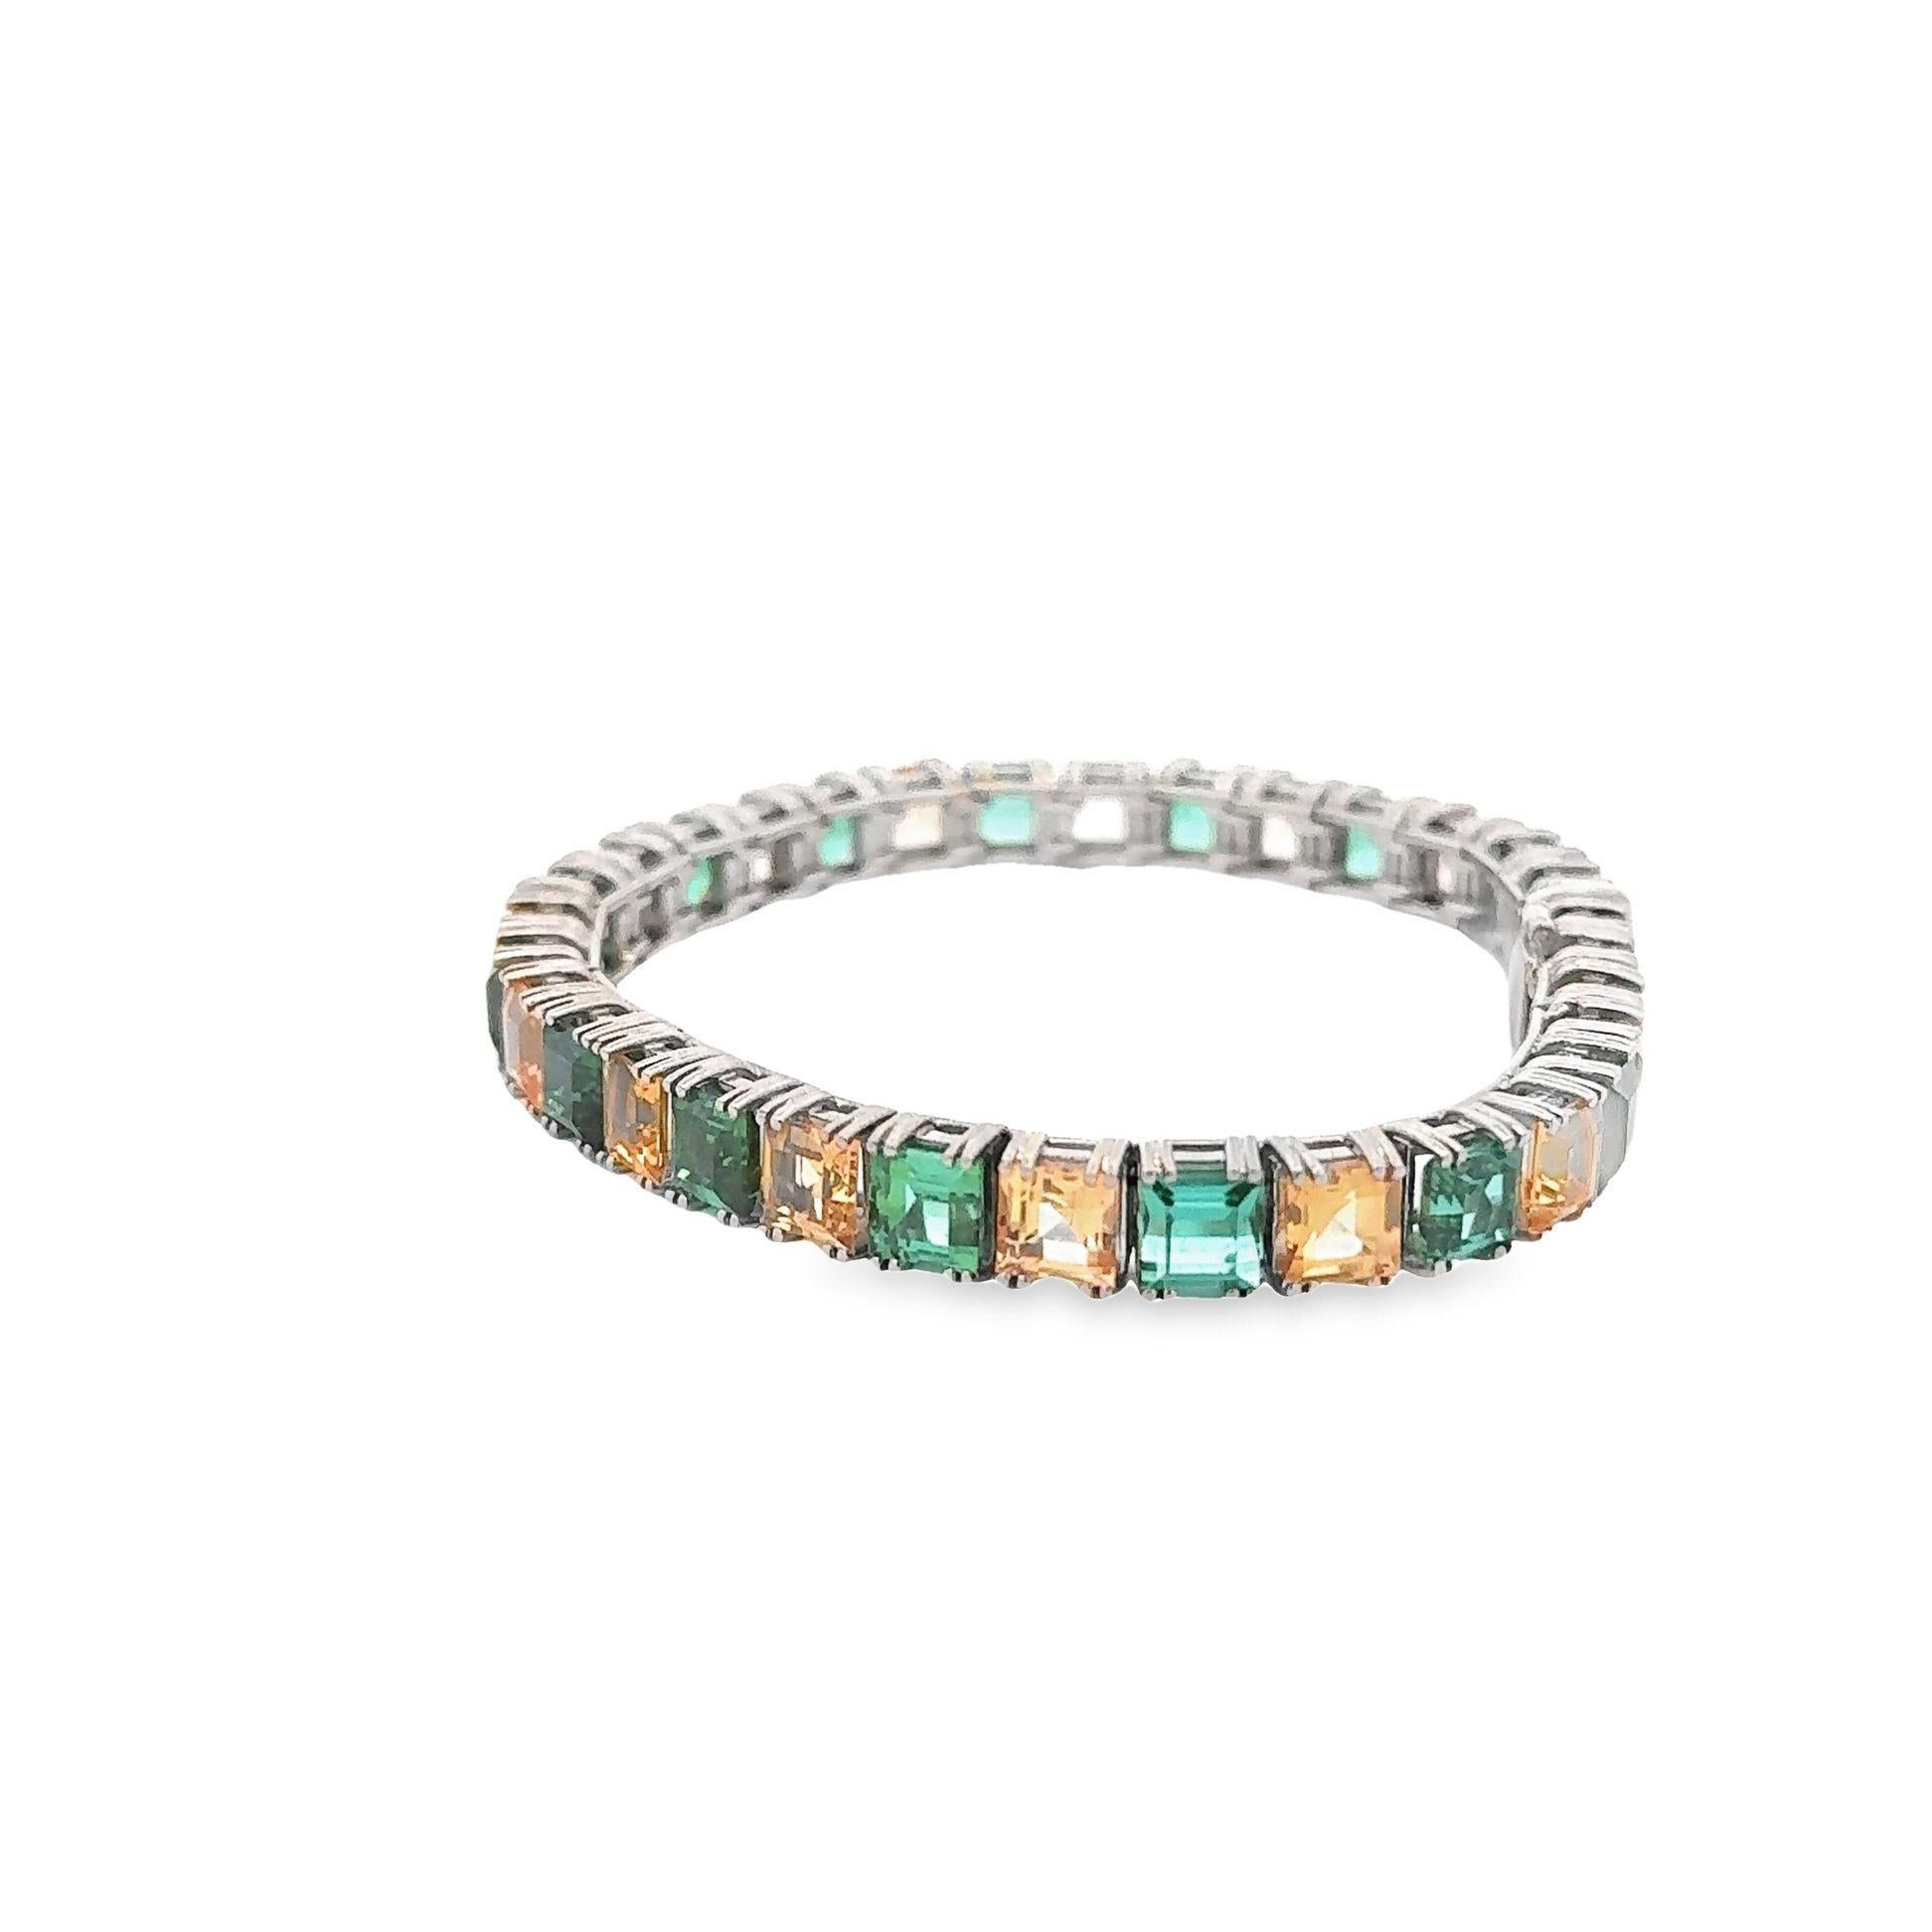 A chic line bracelet featuring interchanging square-shape tourmaline and topaz! The tourmaline have a soft and clean blueish-green color while the topaz have a golden orange-yellow color which complement each other. They are set in 18k white gold in